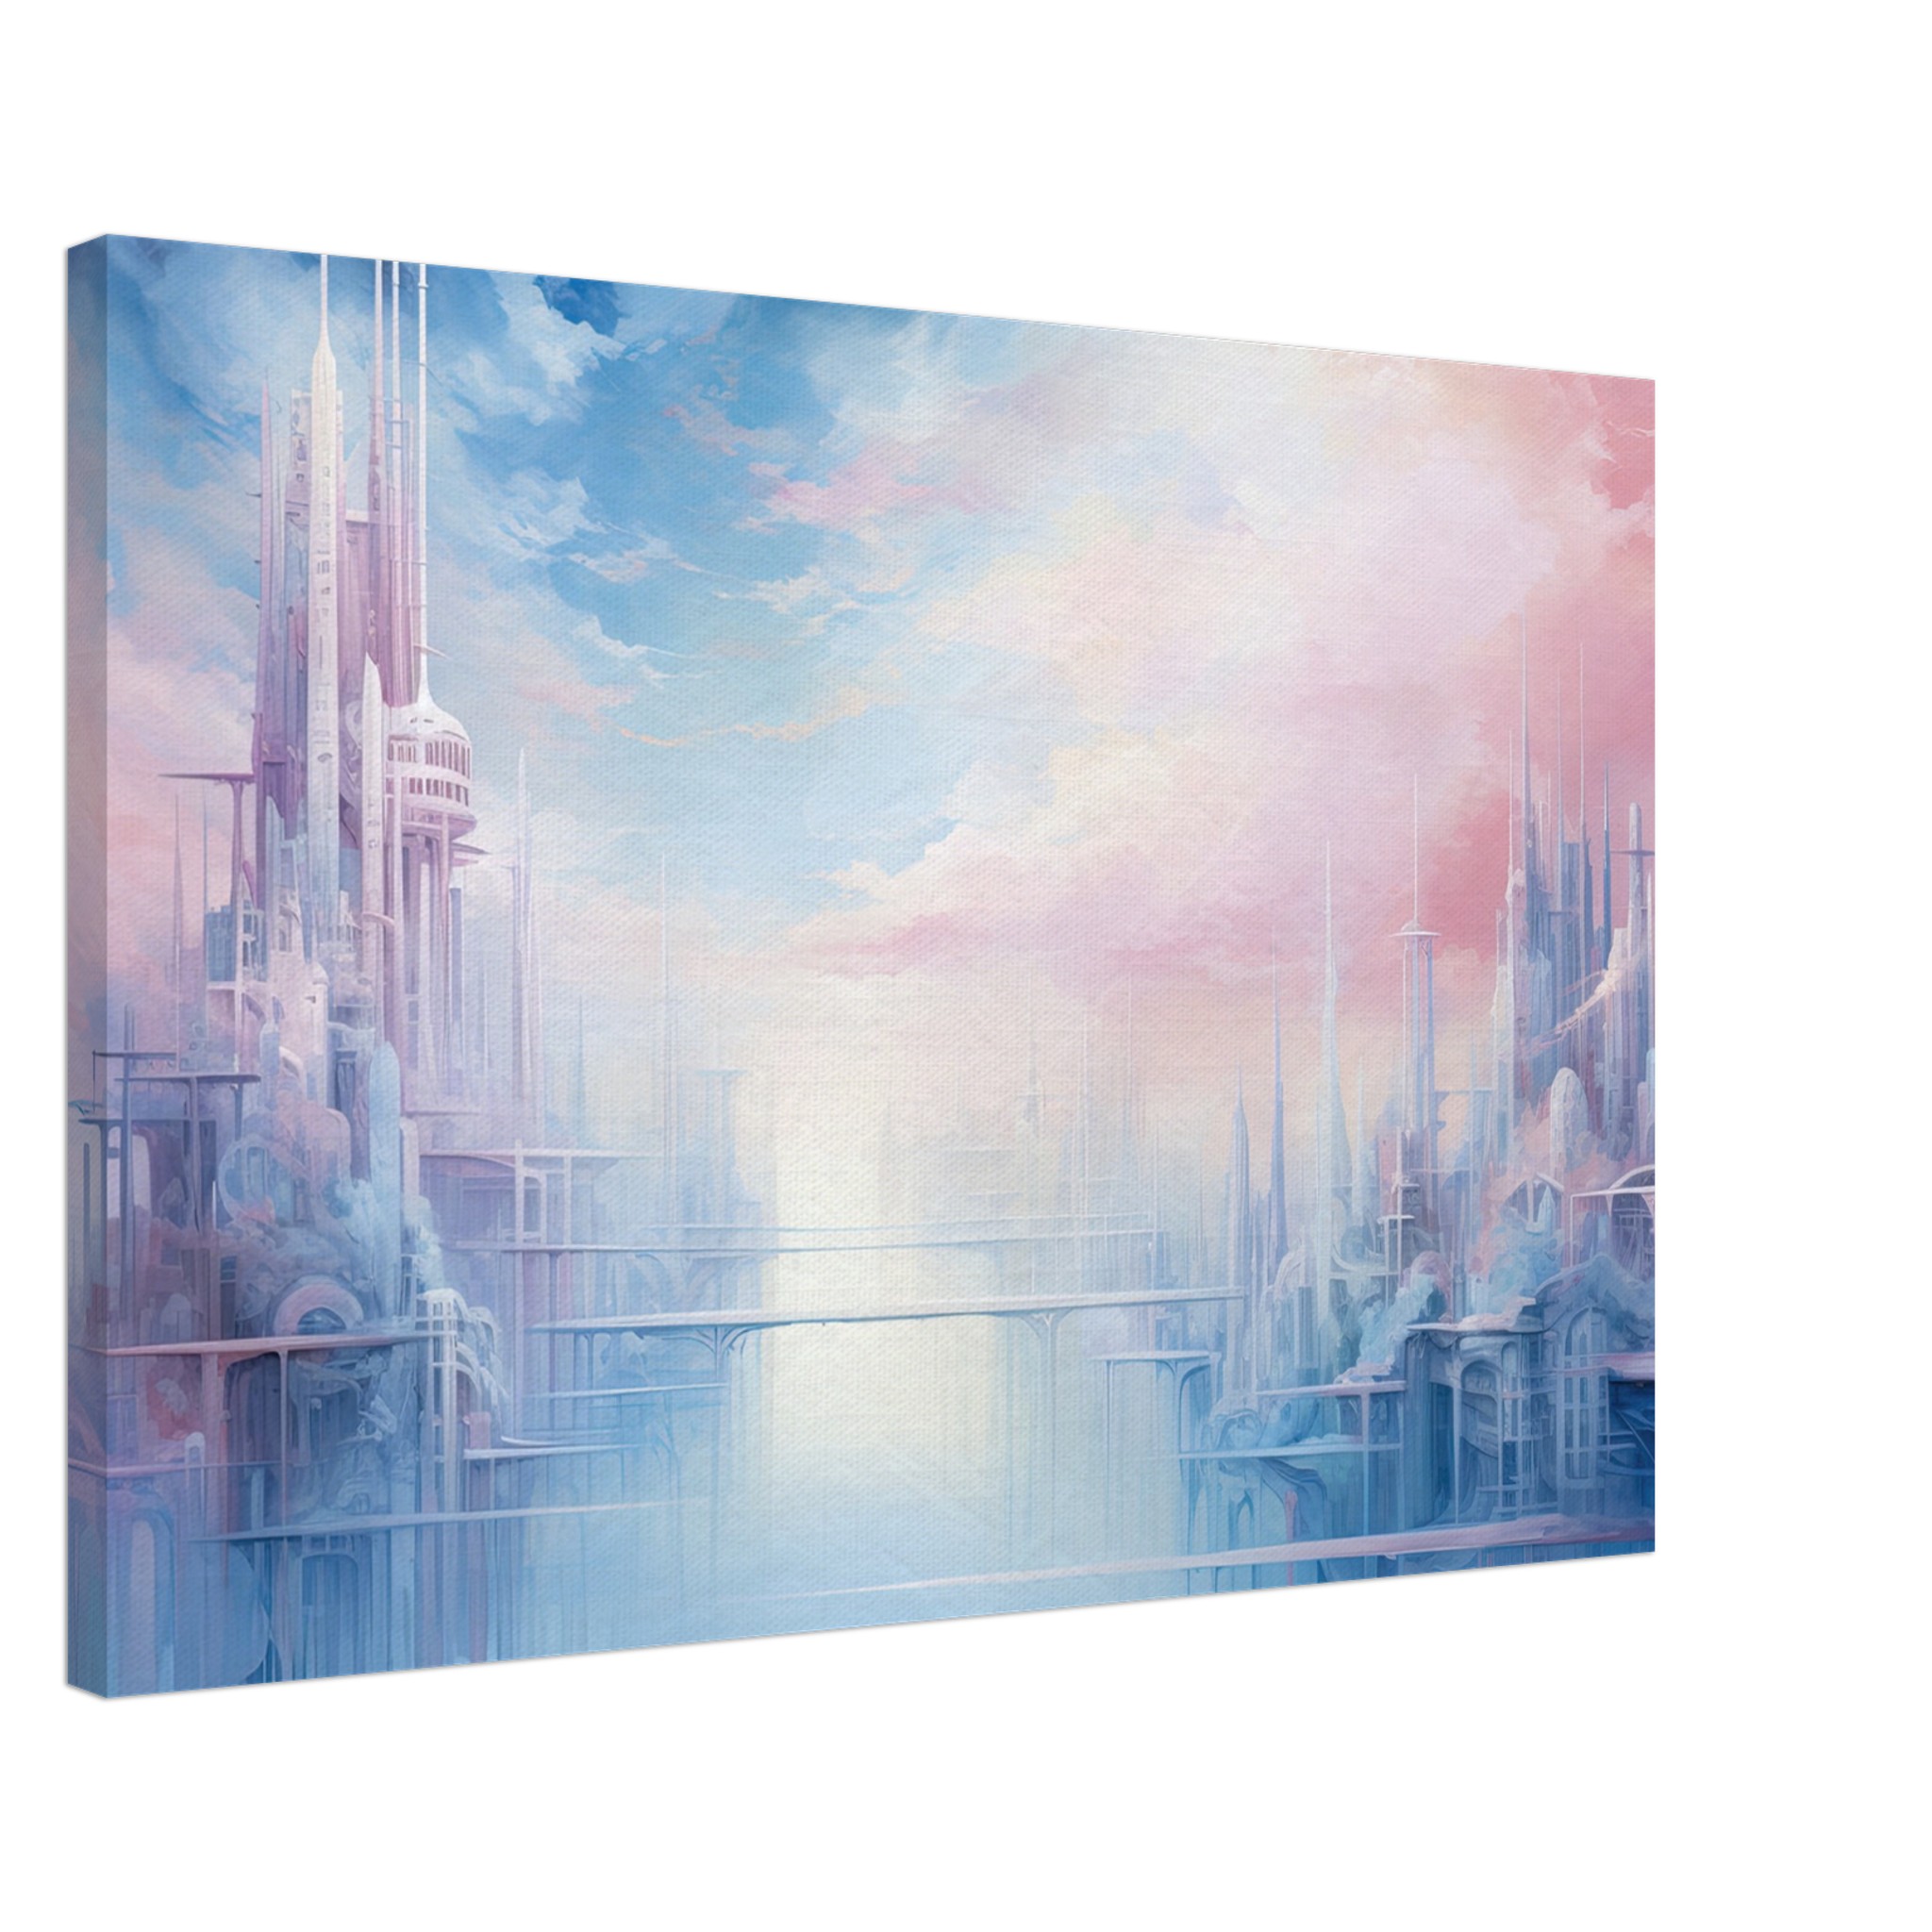 Pastel City in the Clouds Canvas Print – 60×90 cm / 24×36″, Thick